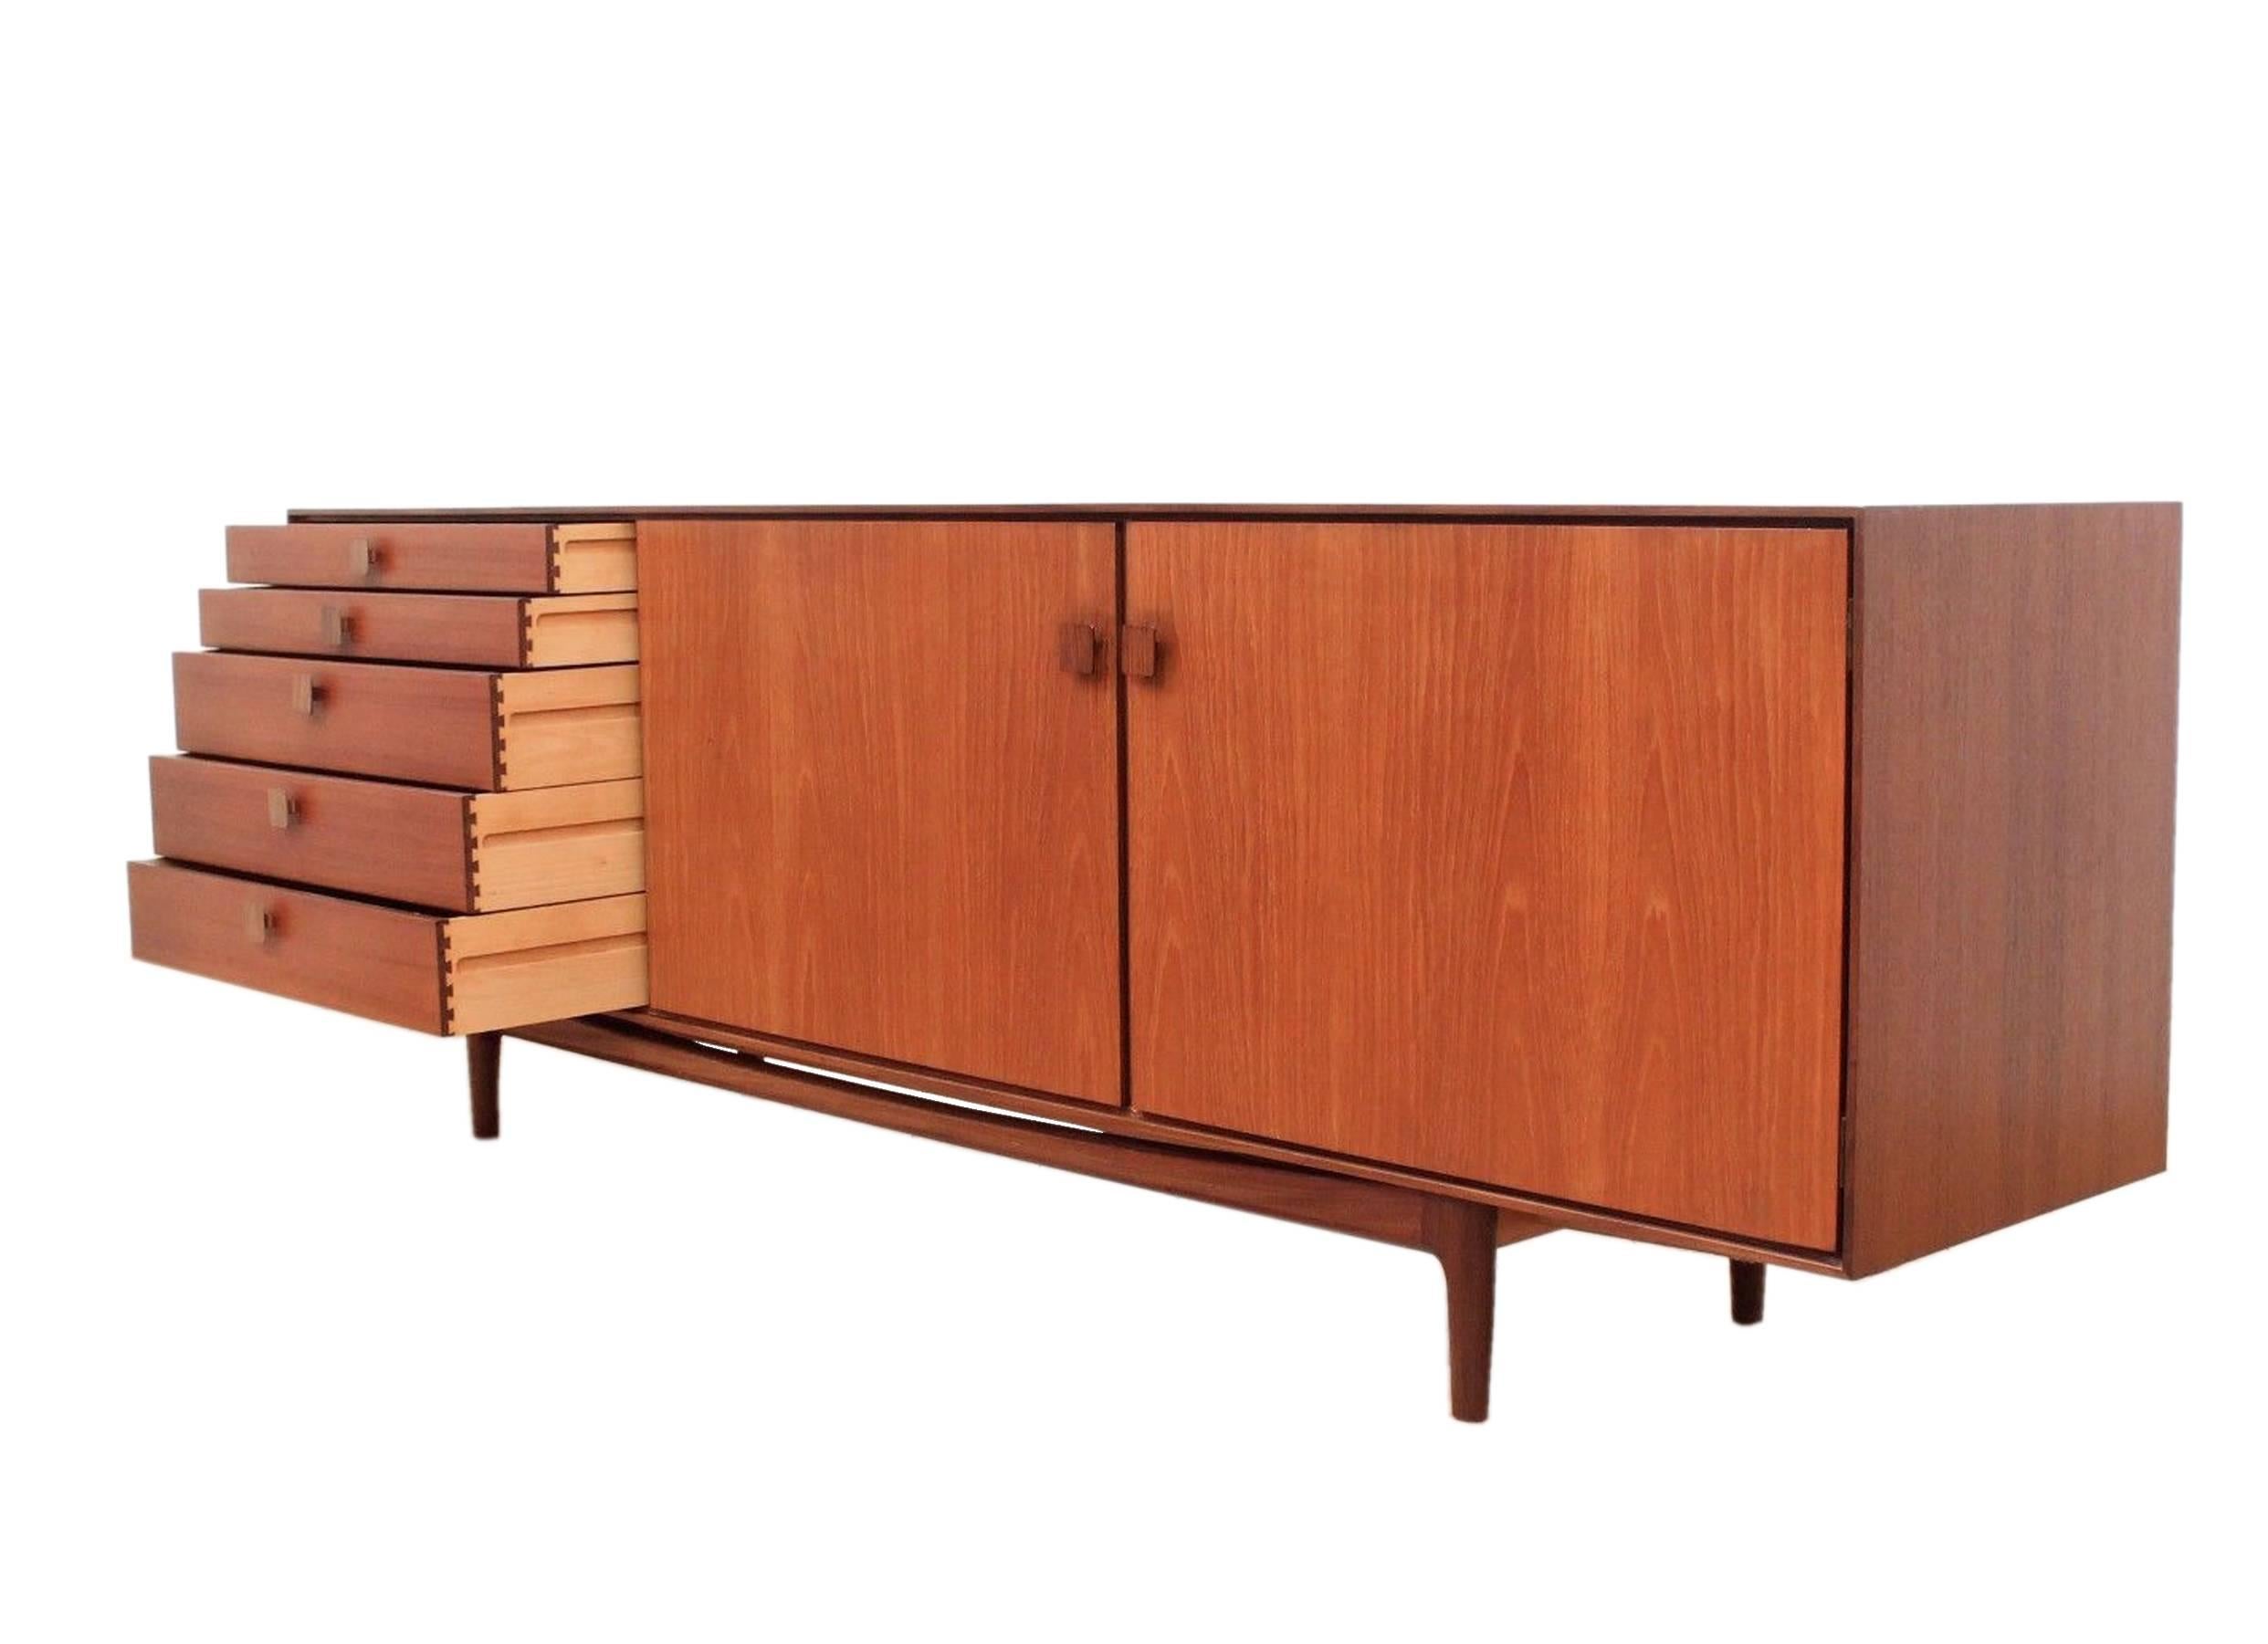 Danish Mid-Century Long Teak Sideboard by IB Kofod-Larsen for G Plan, 1960s In Excellent Condition For Sale In Basel, CH